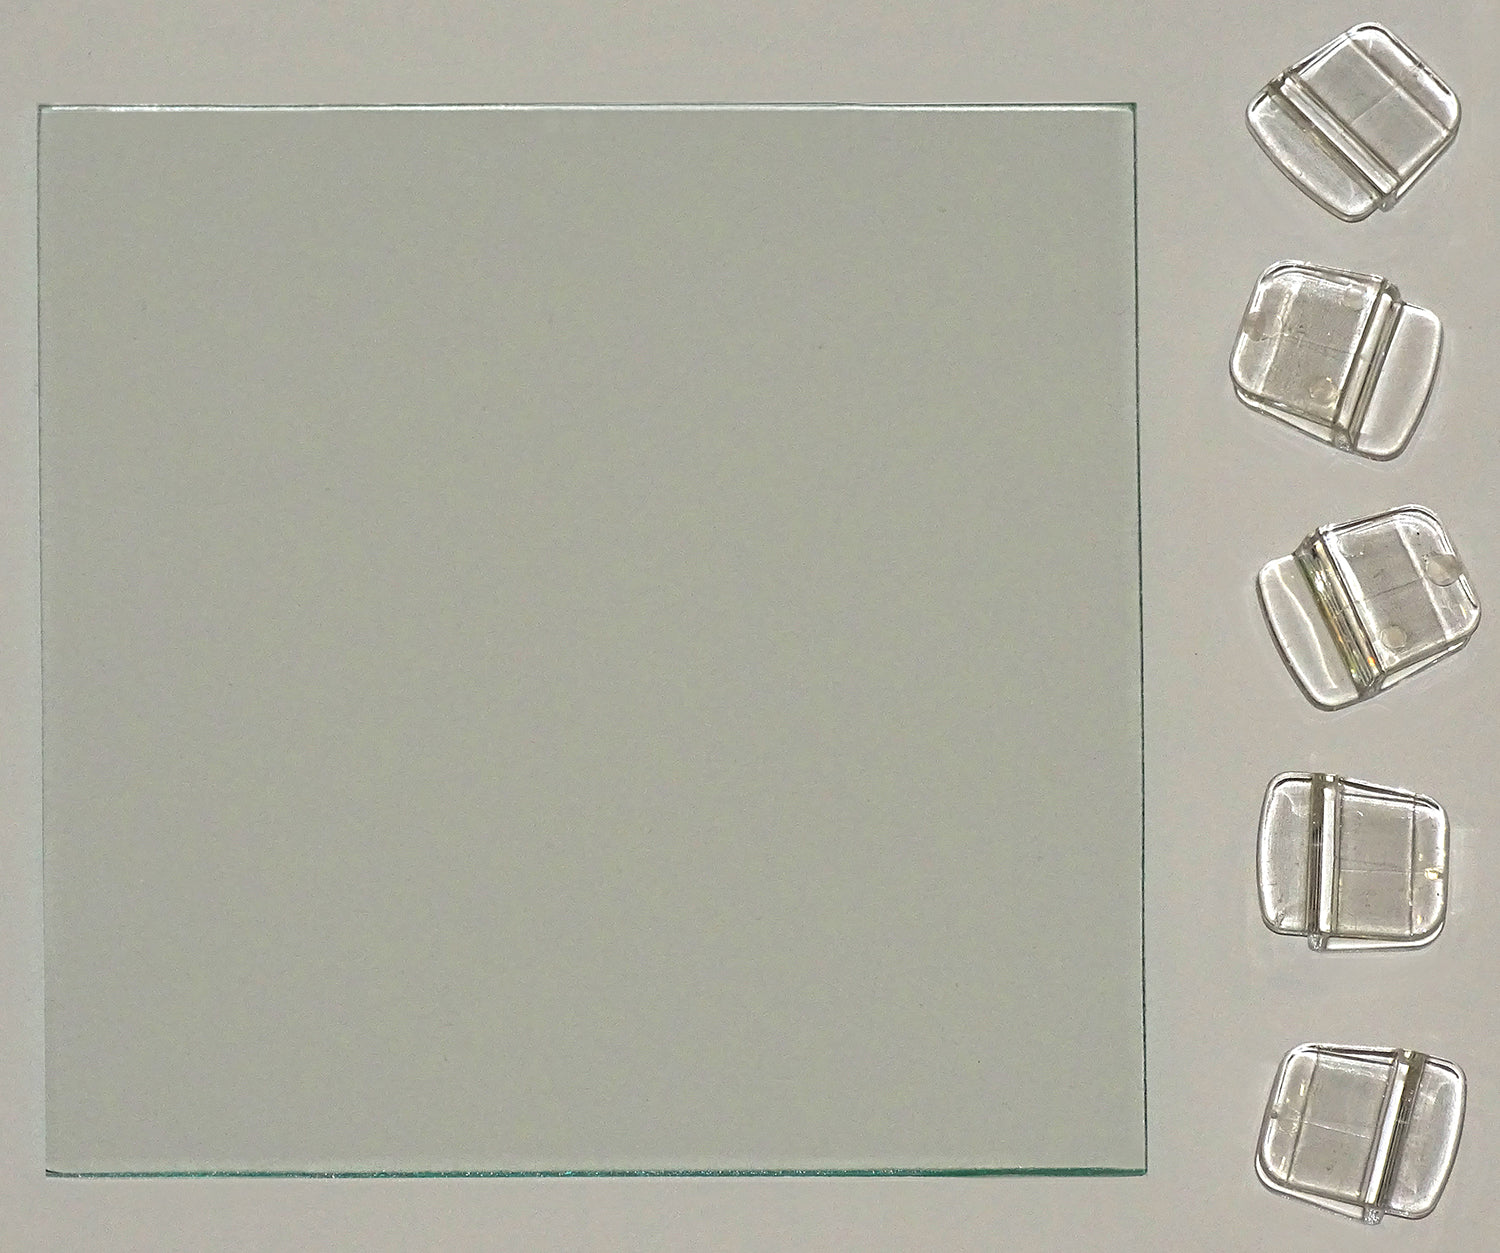 Edgelit 1G and Frameless size 1 glass tops w/ clips